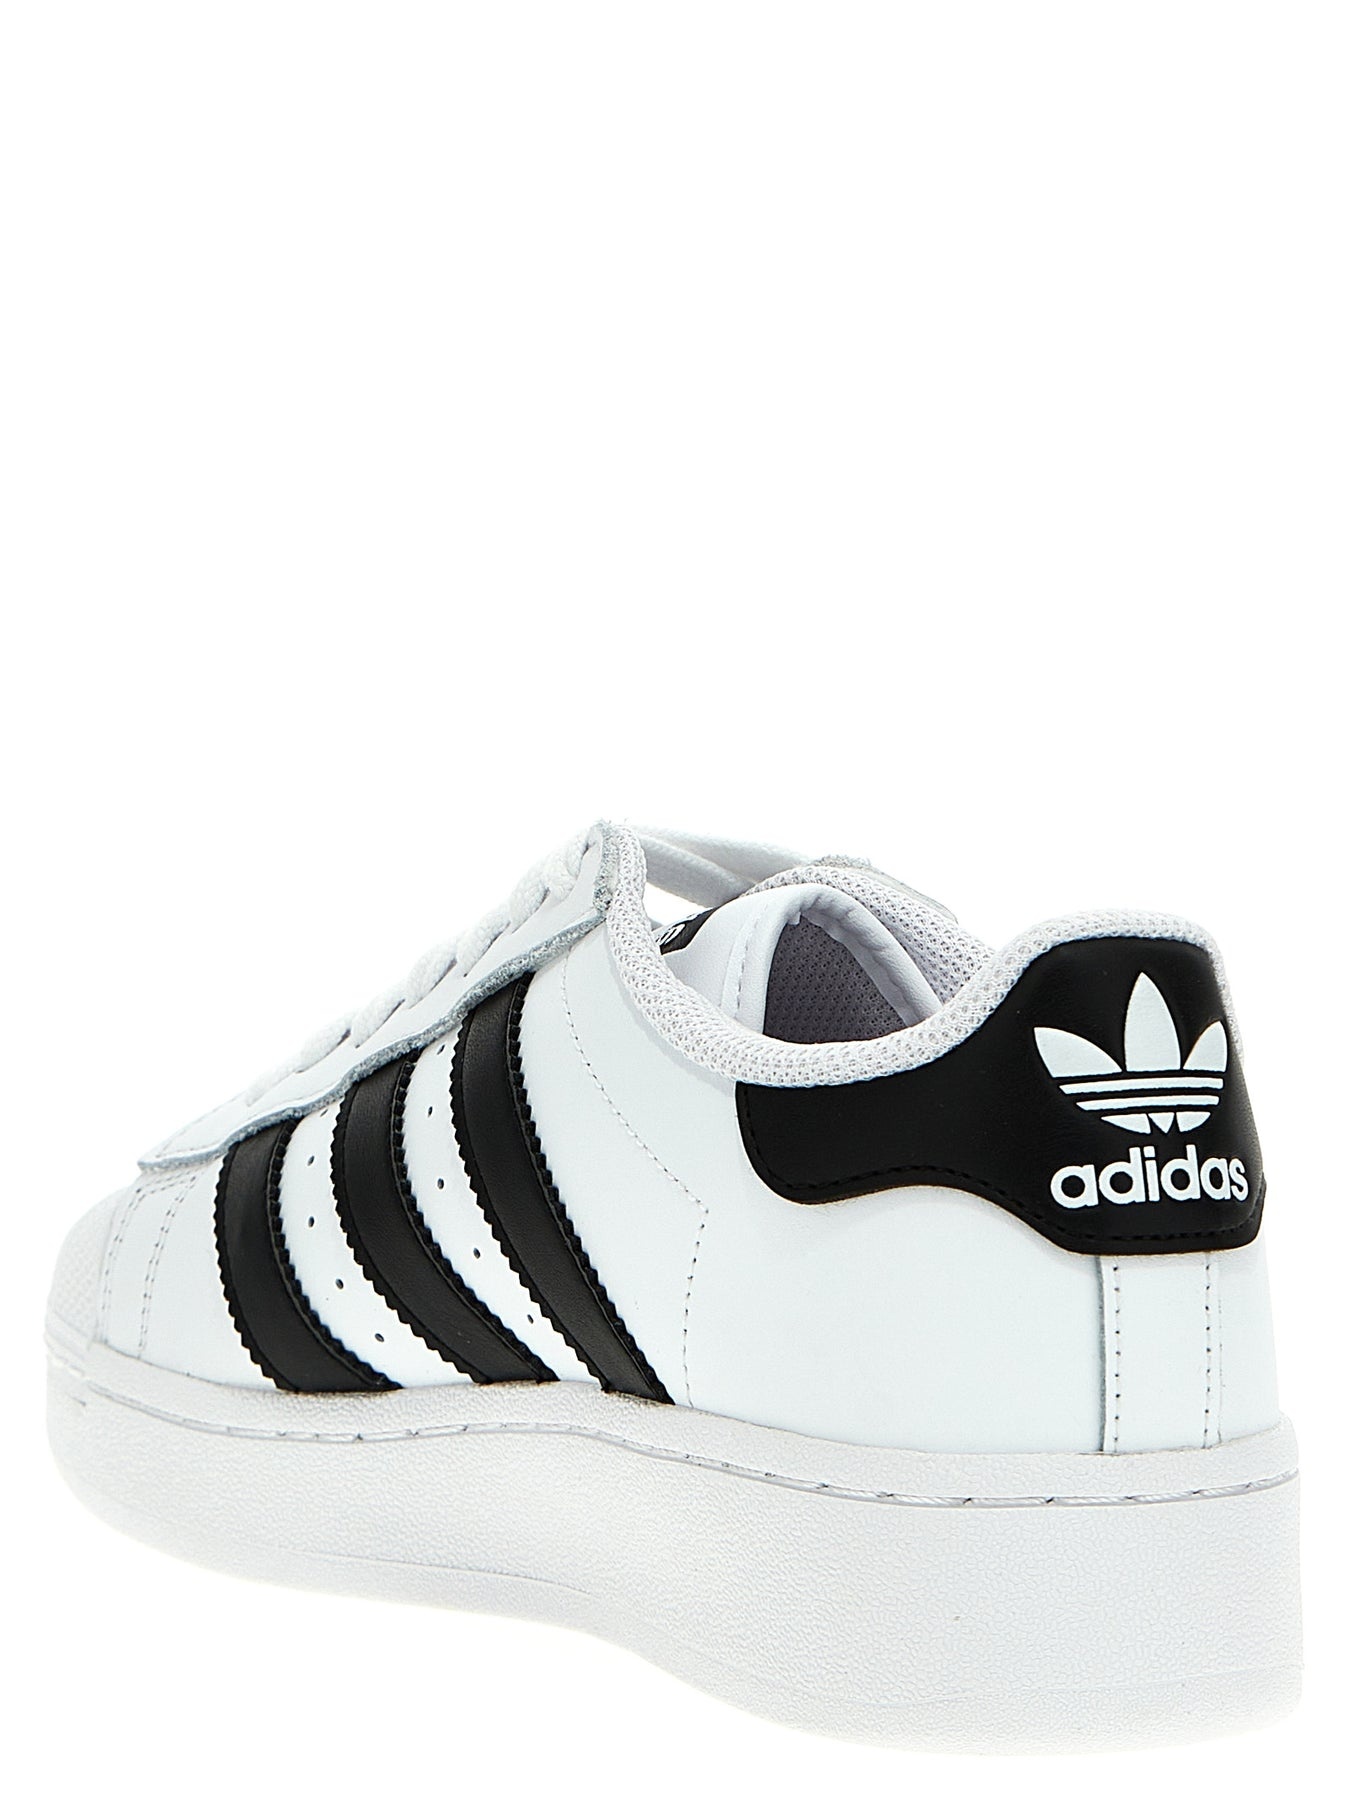 Superstar Xlg Sneakers White/Black - 2